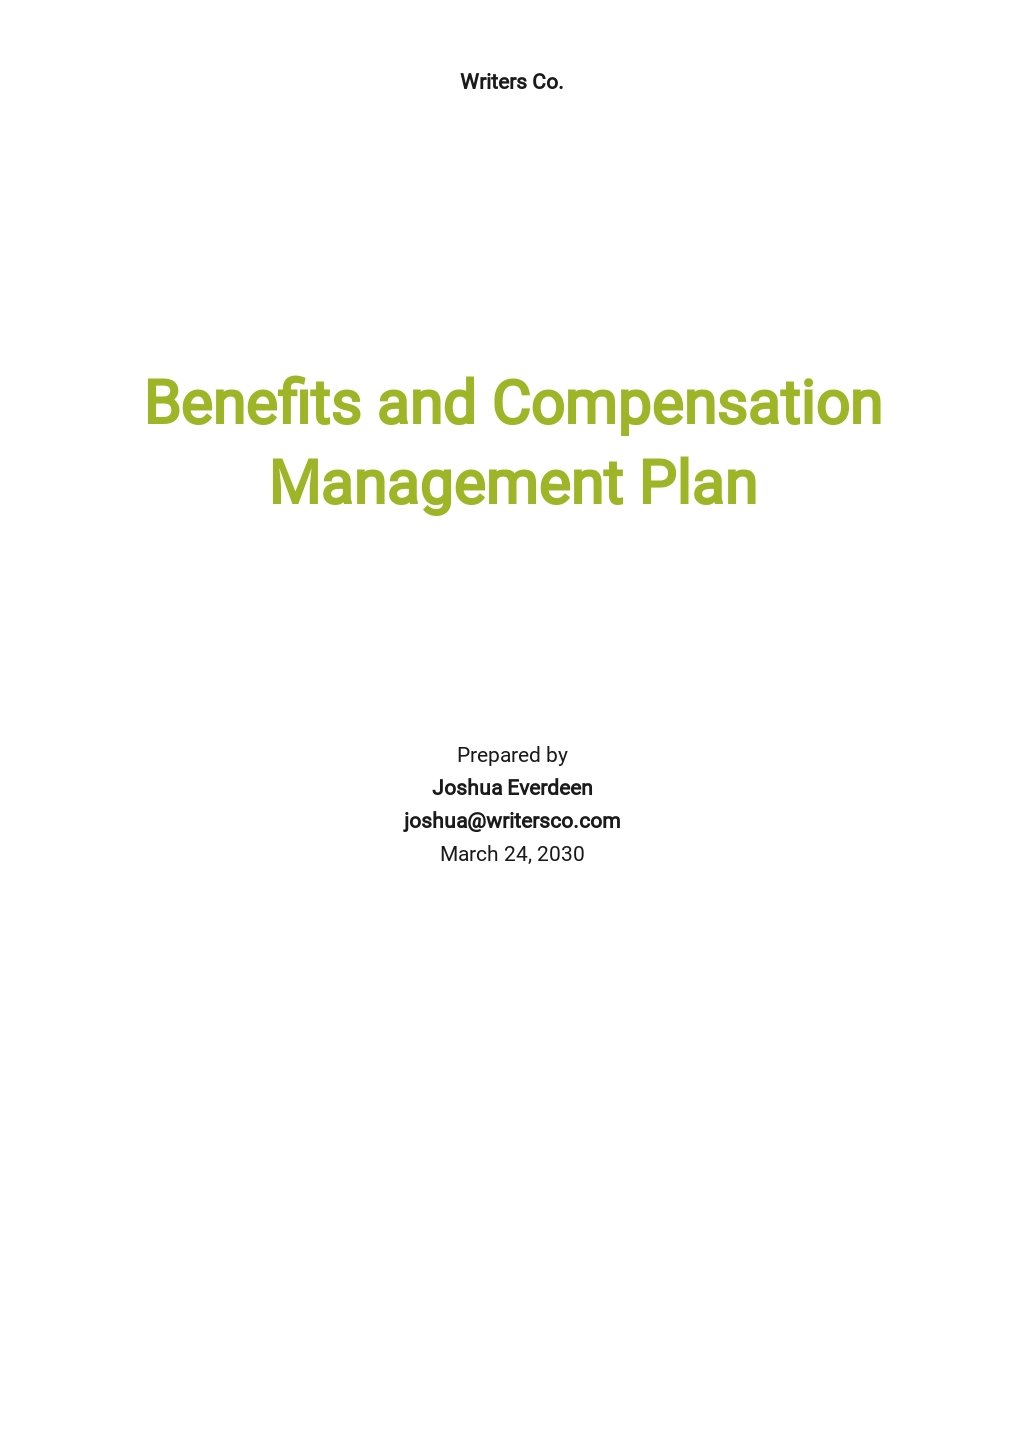 Benefits and Compensation Management Plan Template.jpe